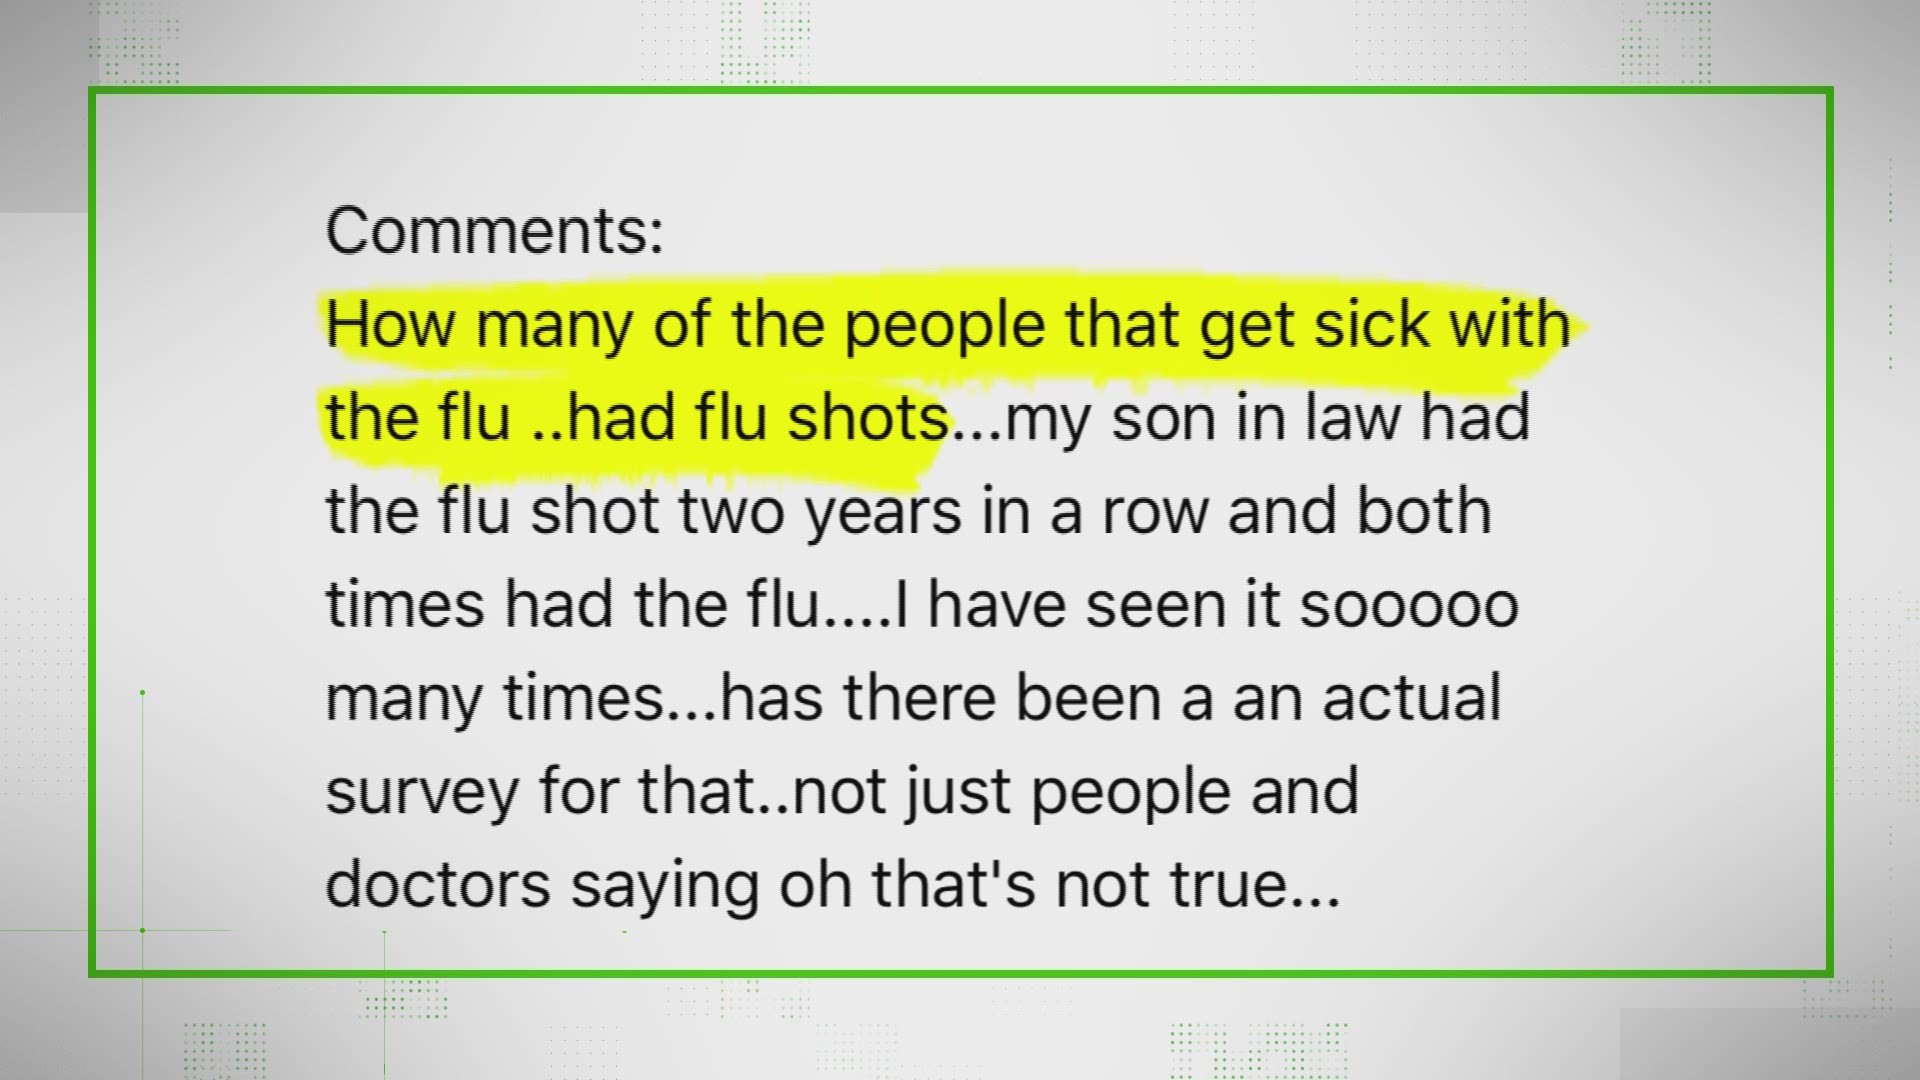 A viewer asked VERIFY whether the government tracks how many people have the flu shot but still get sick.